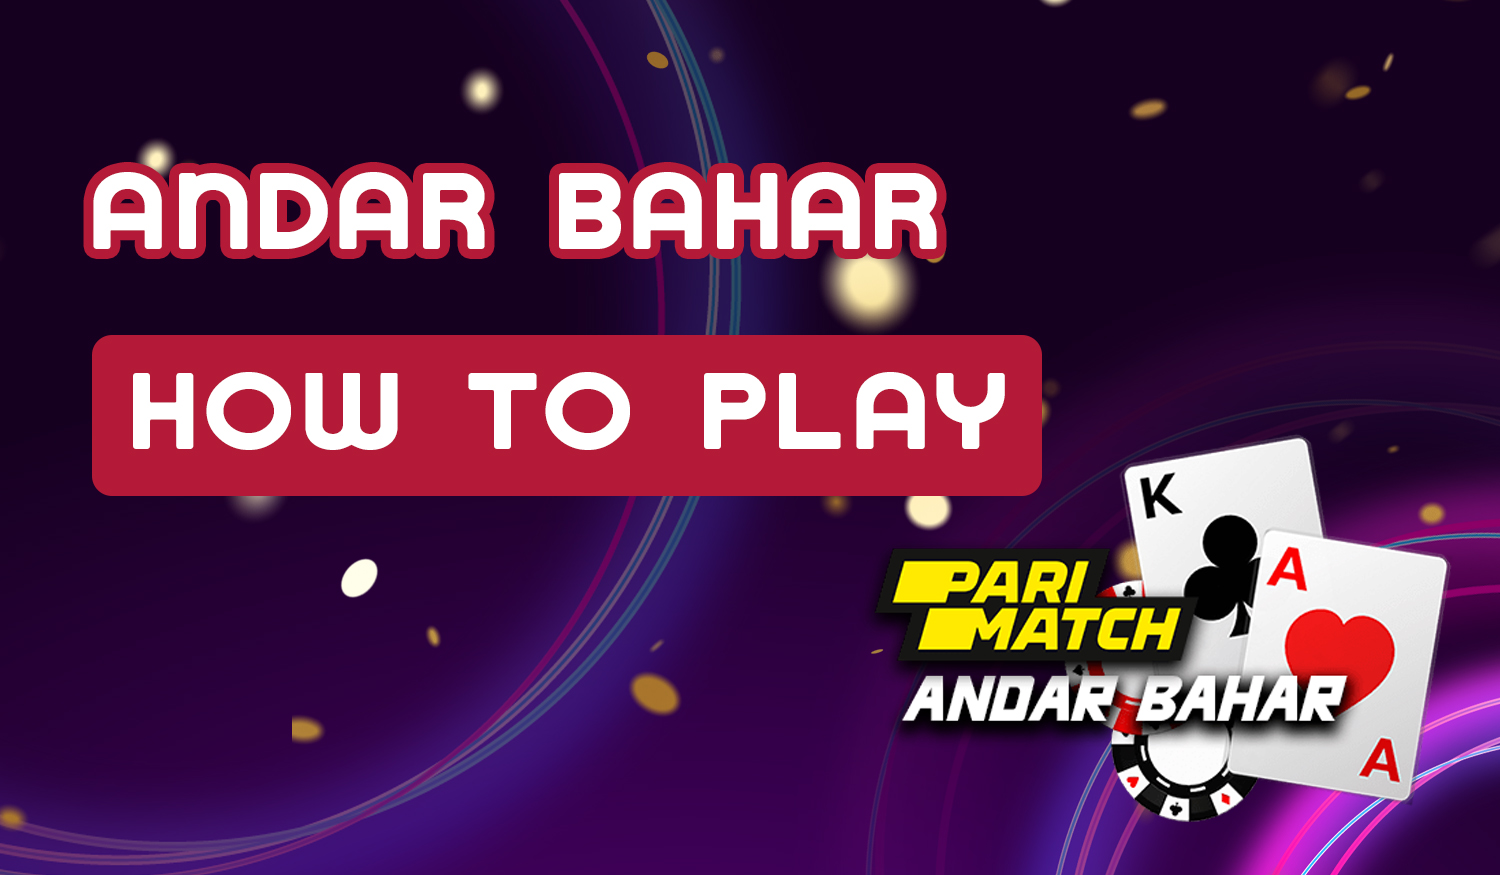 Parimatch Andar Bahar Basic Rules for Indian Users